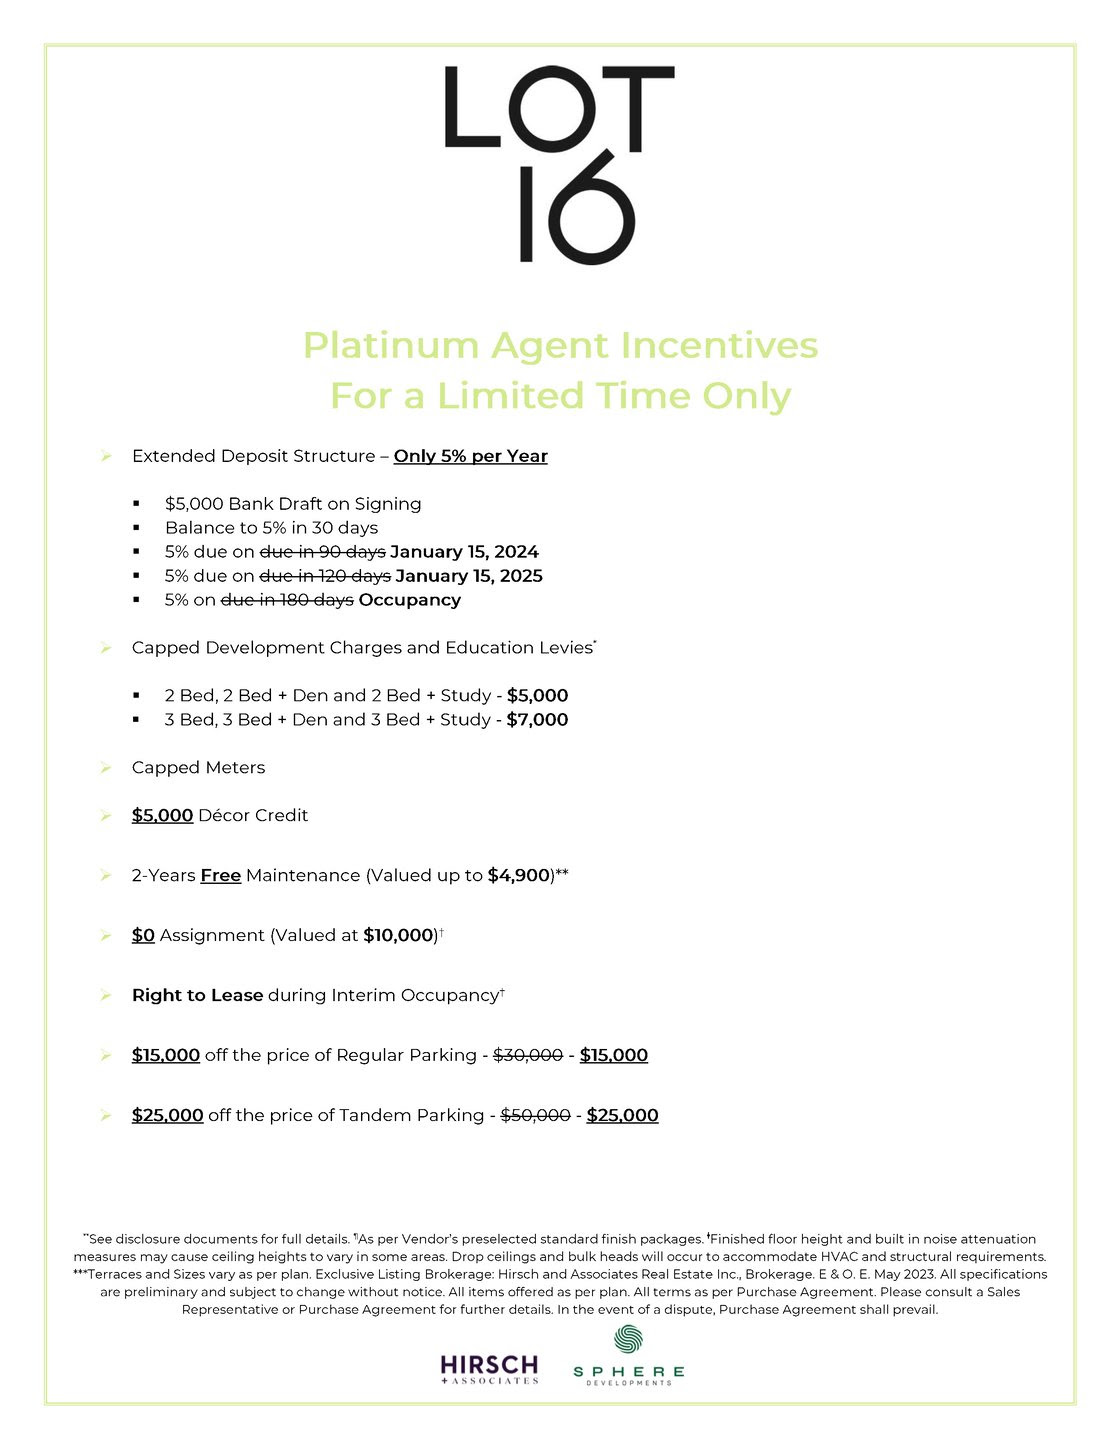 Lot 16 - Incentives 2023-05-24_Page_1